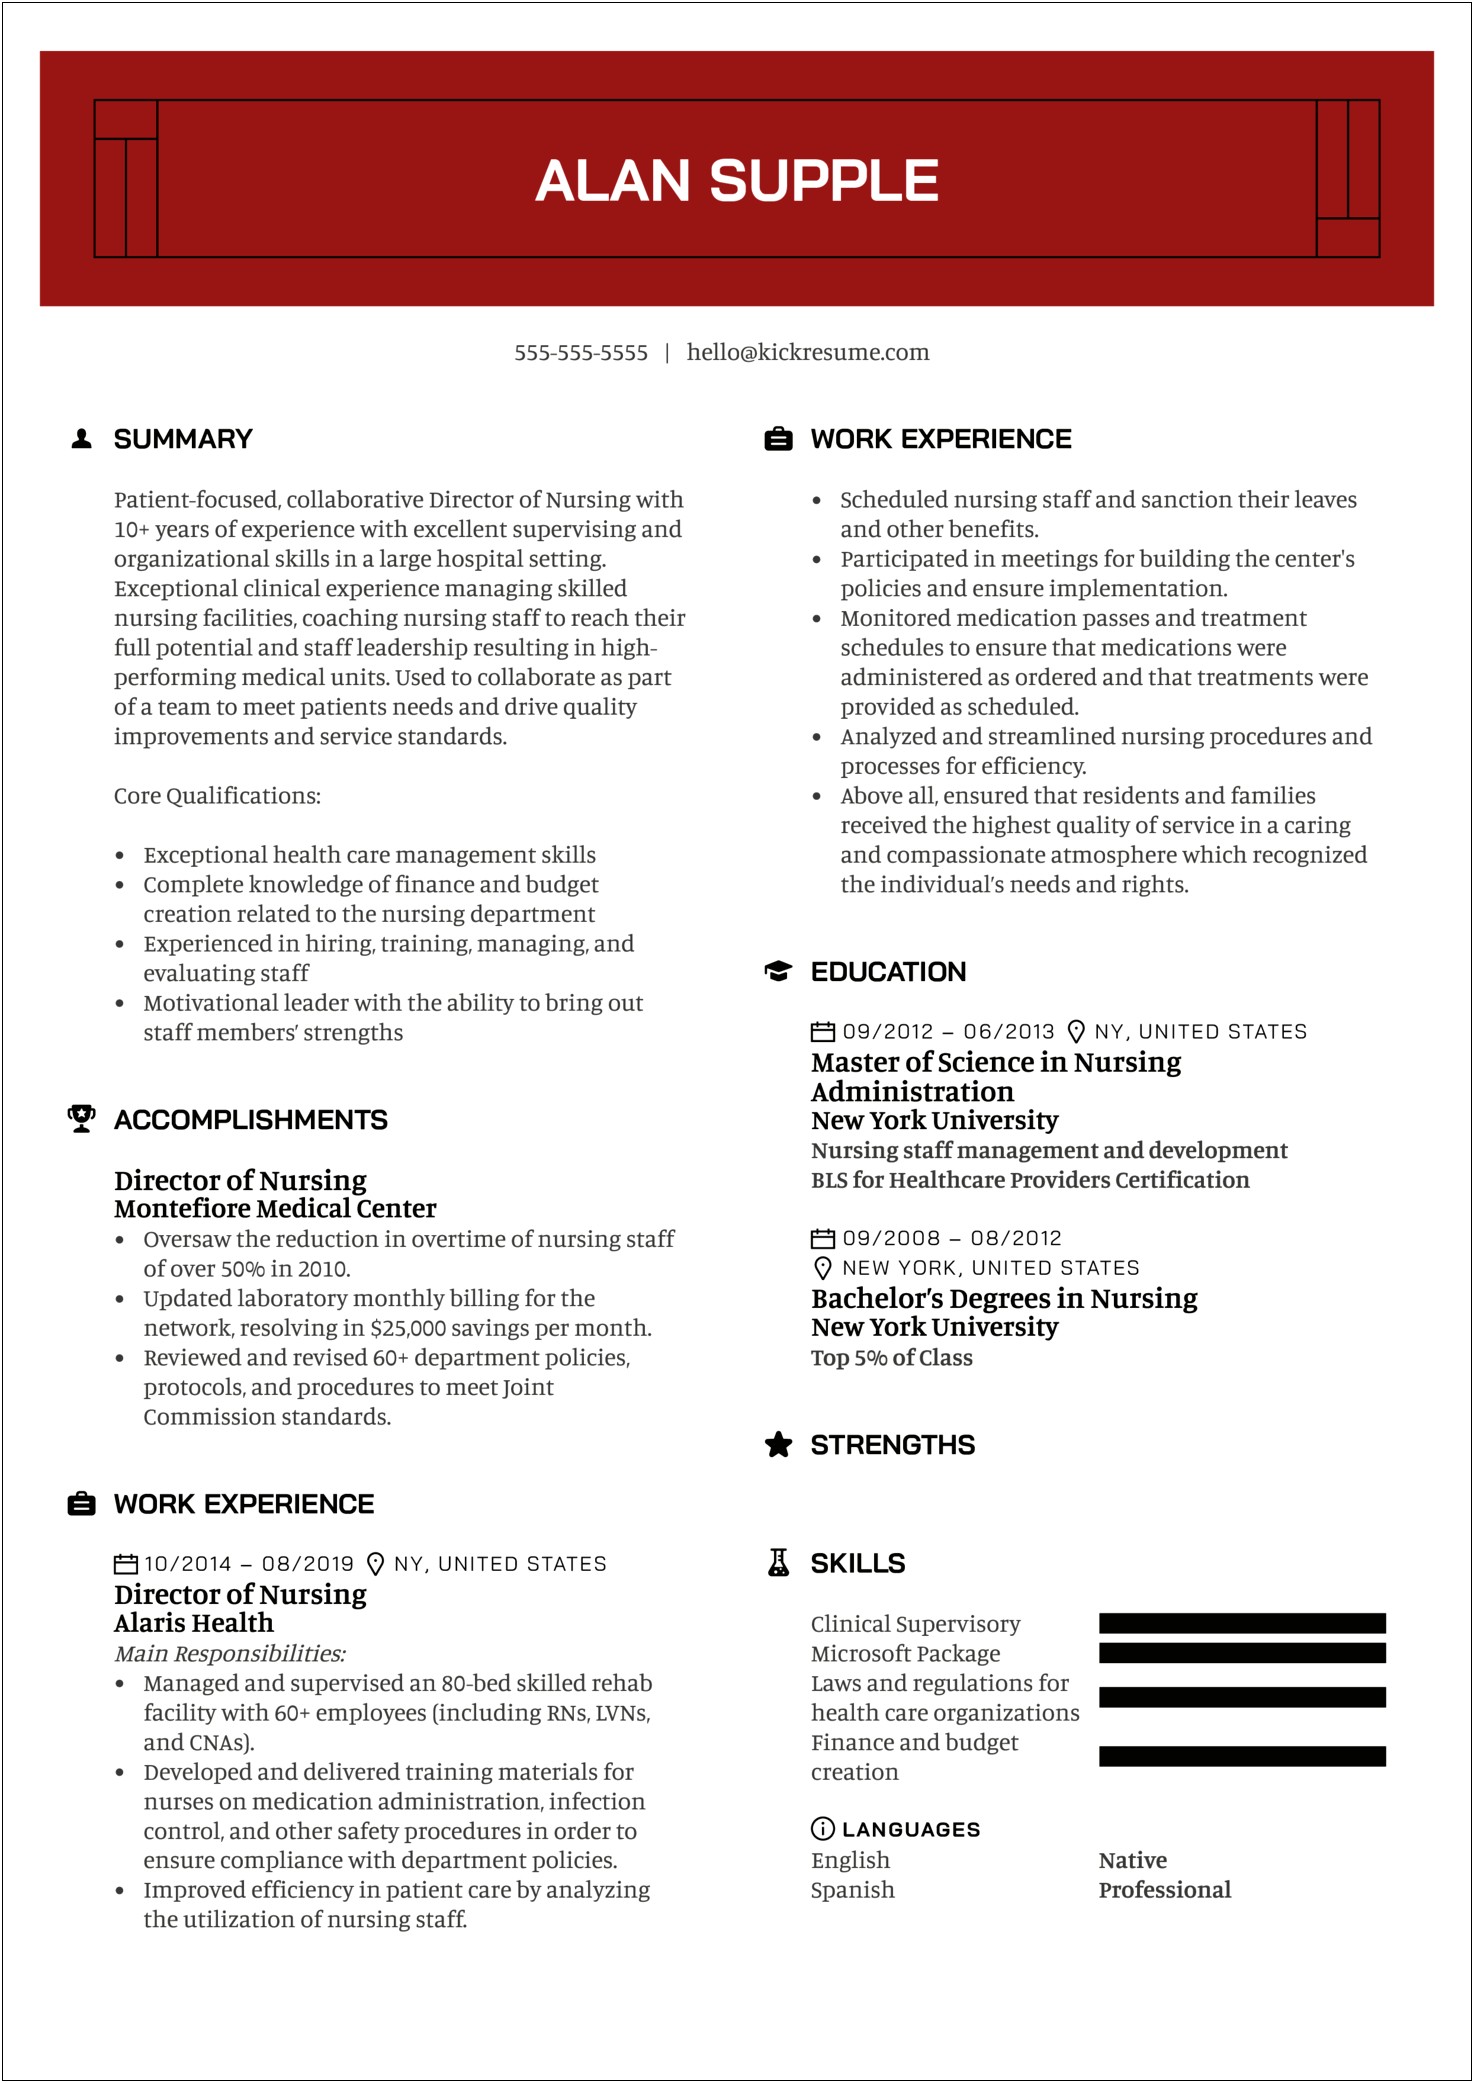 Nurse Manager Resume Objective Examples